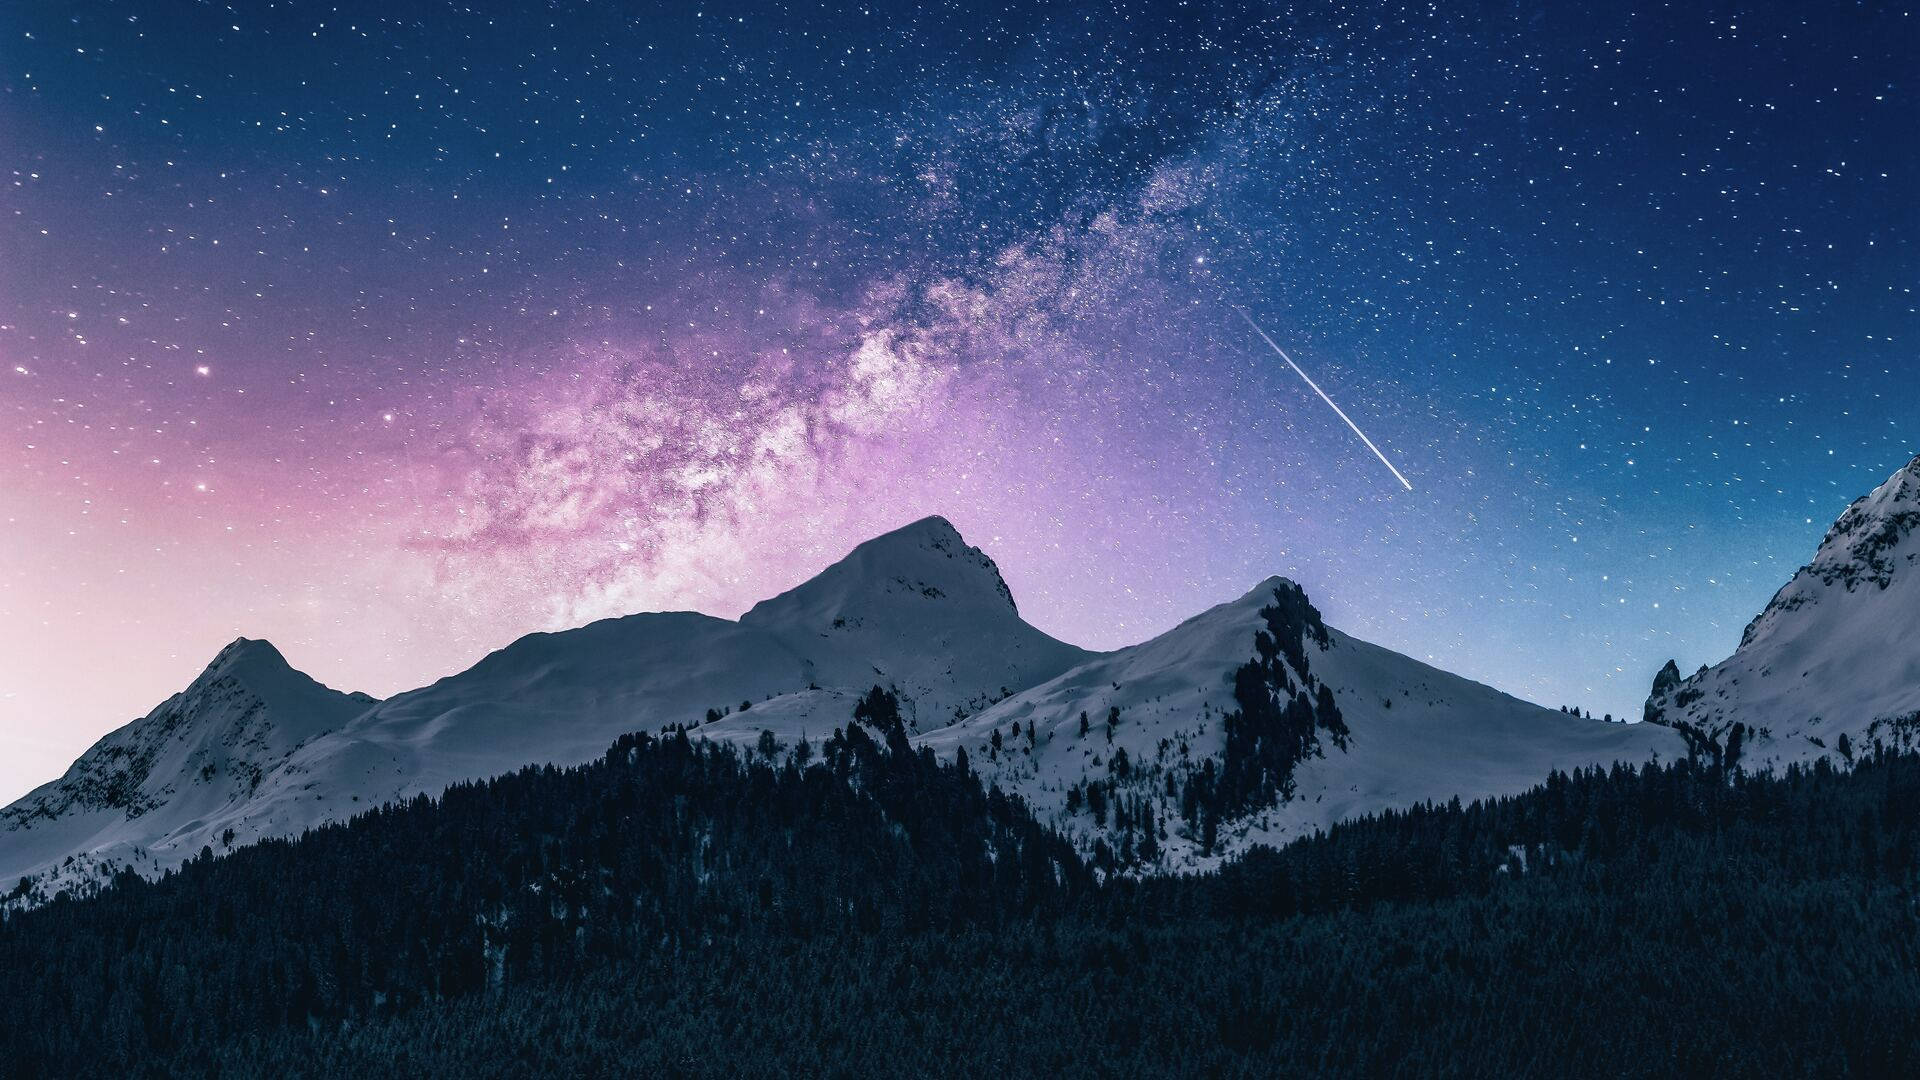 Shooting Star Over Mountain Aesthetic Landscape